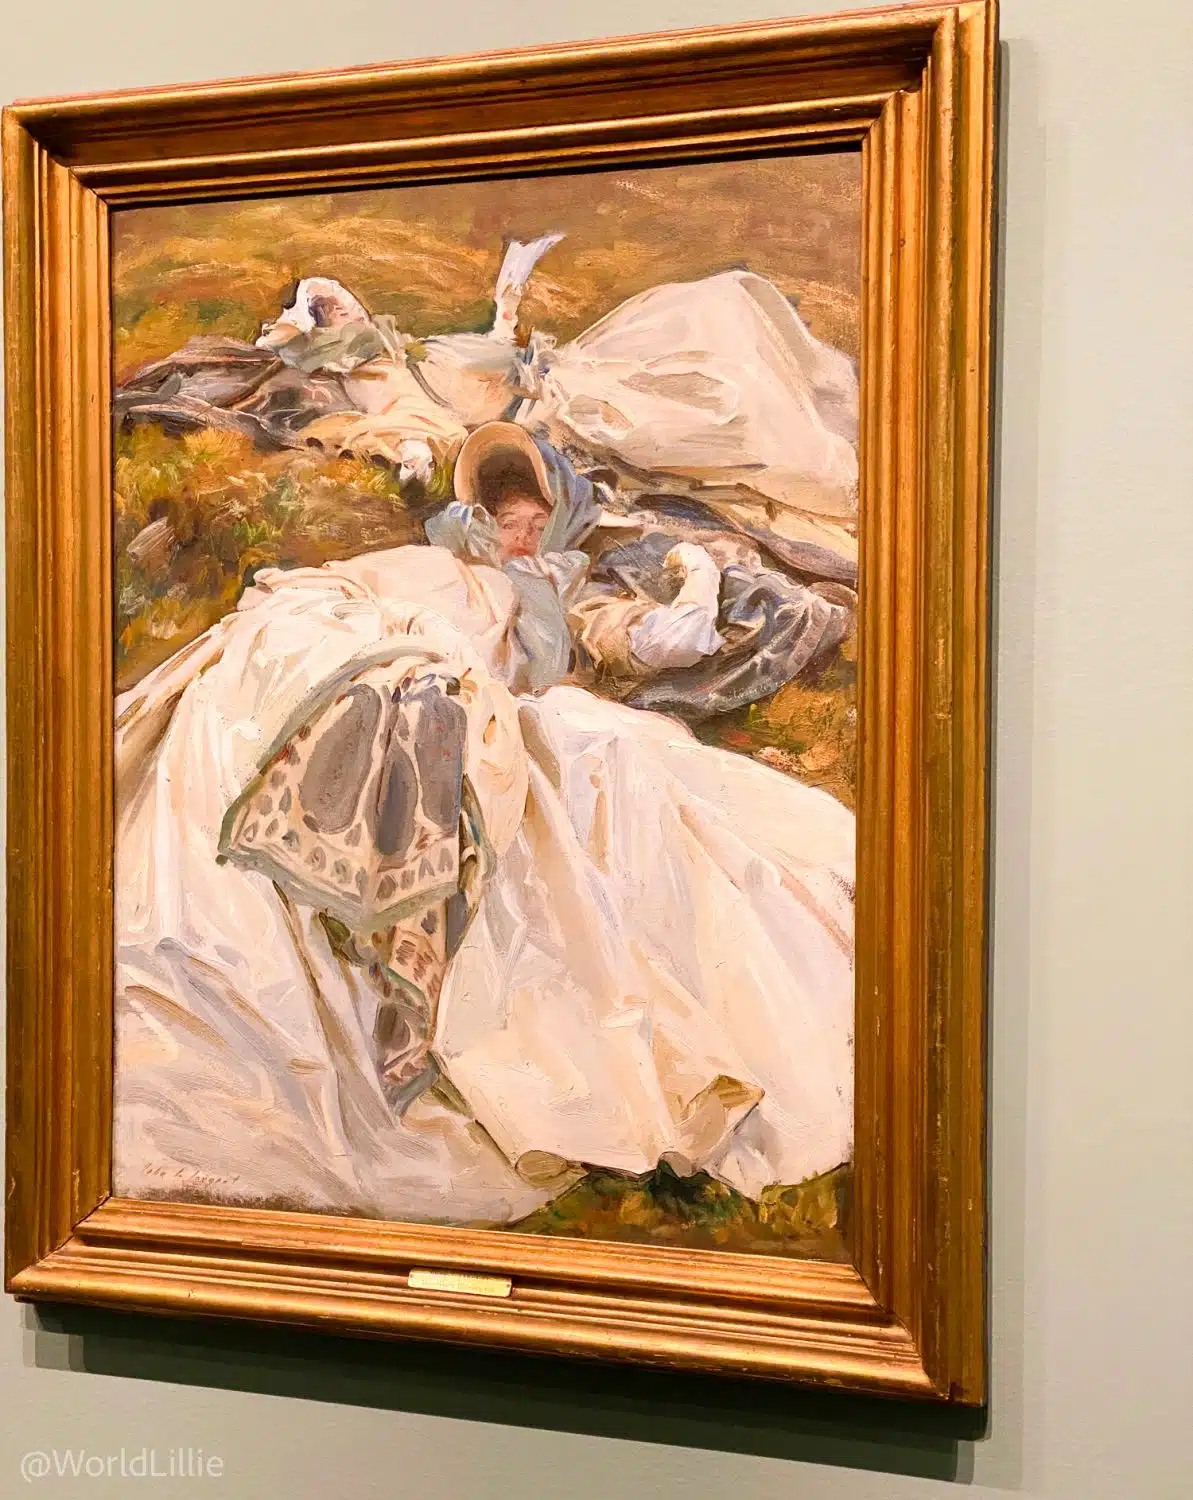 "Two Girls in White Dresses," 1911 by Sargent.